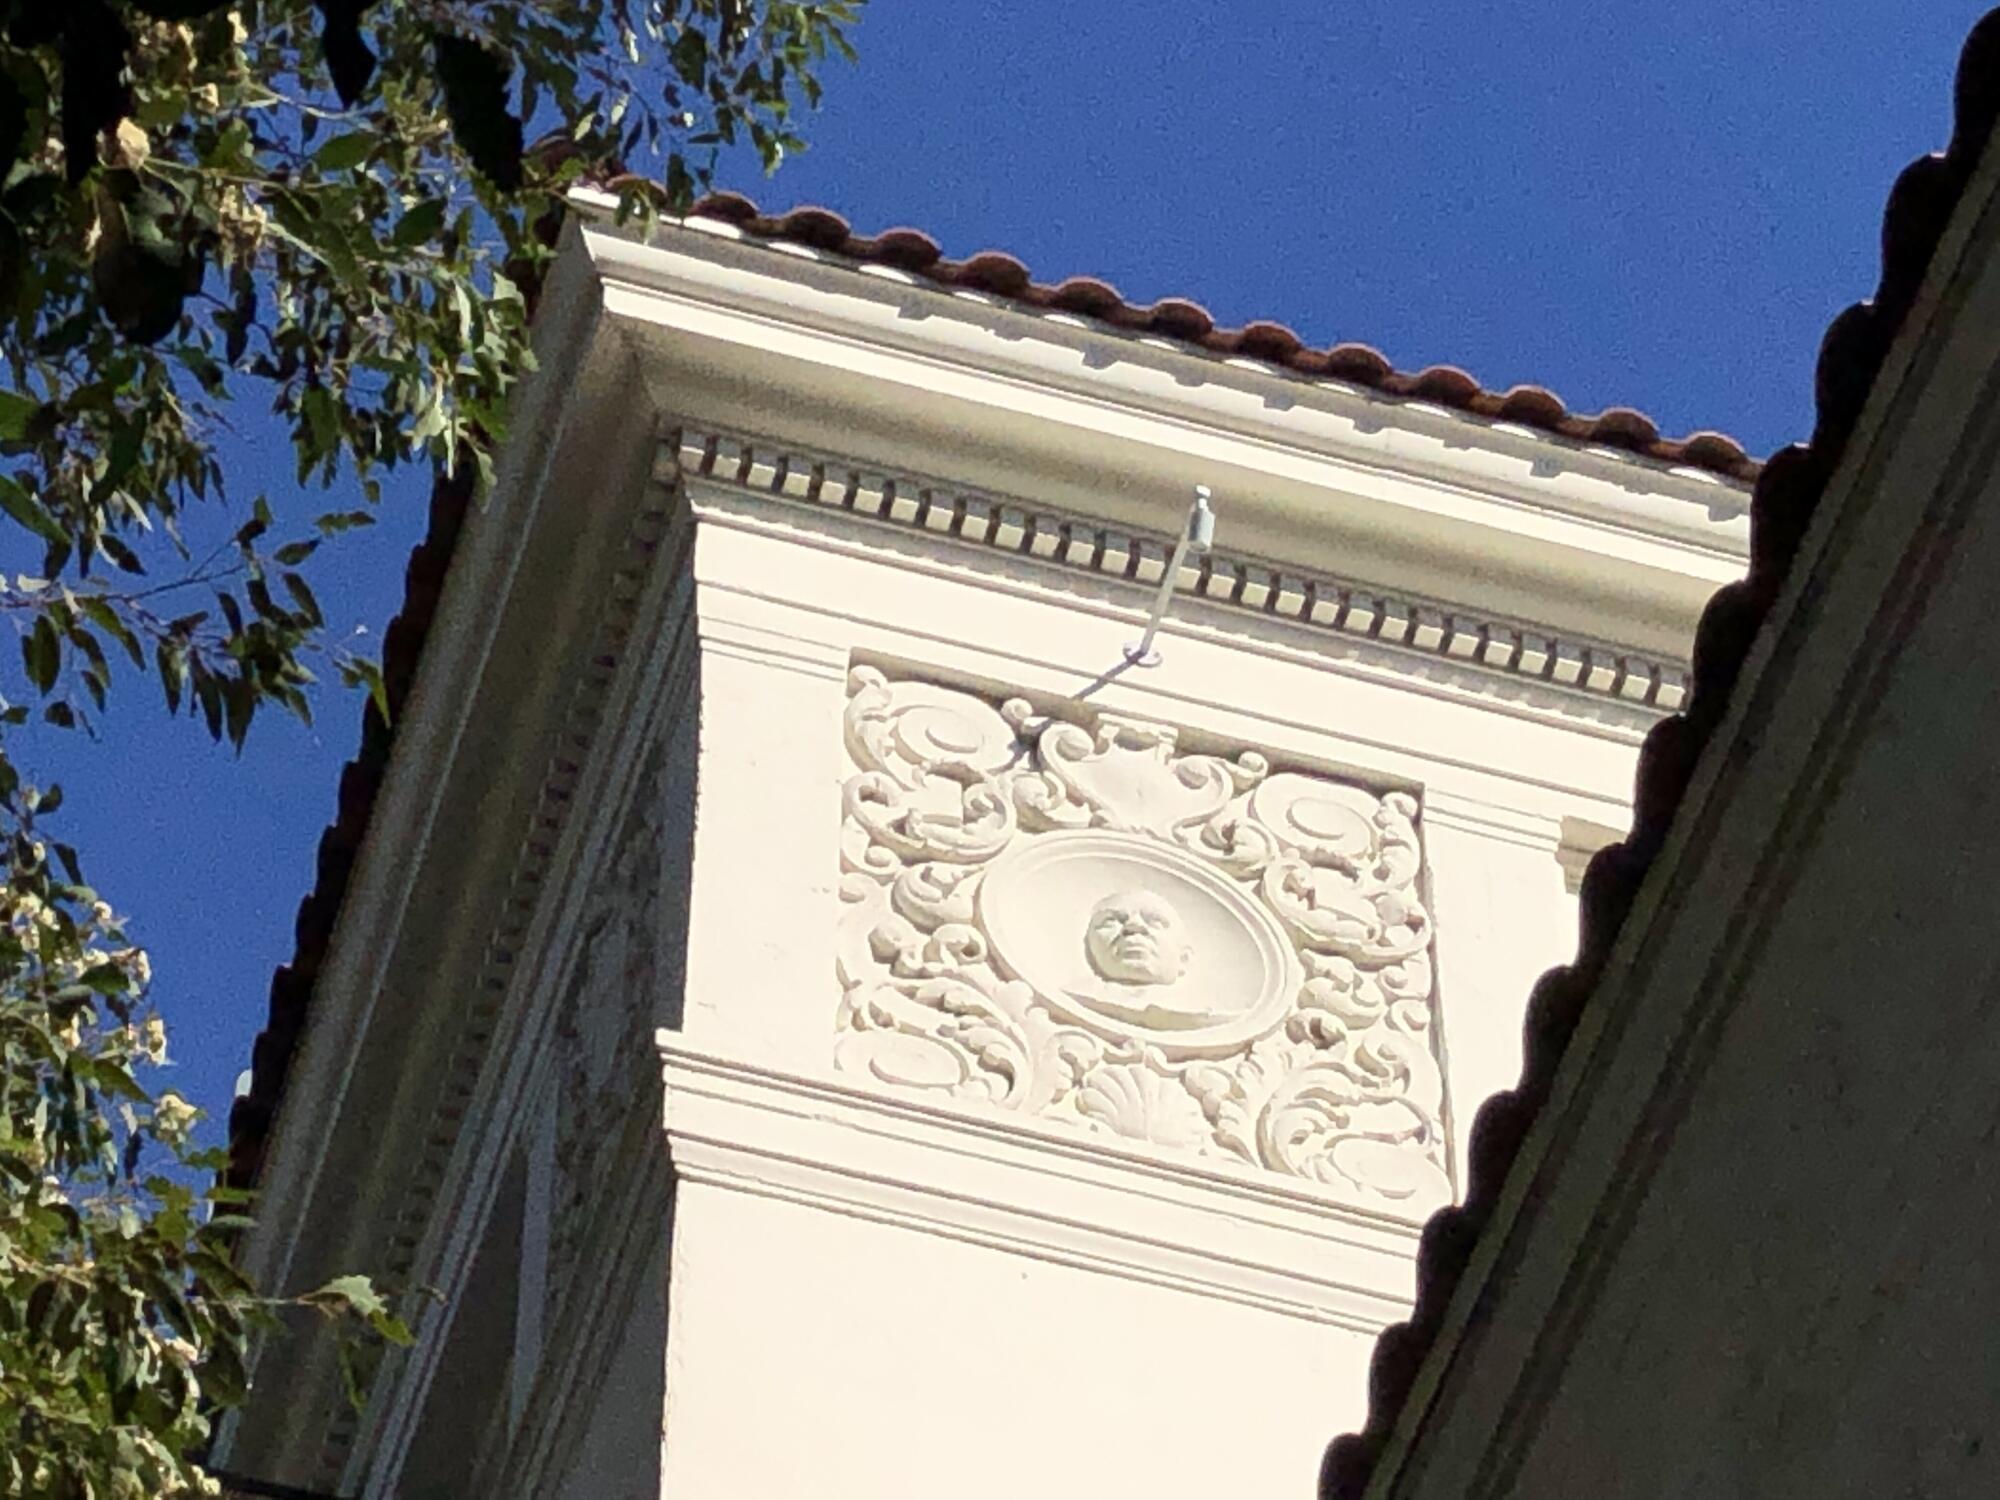 The corner of a building's ornate roofline, featuring a bas relief of a man and Spanish roof tile.